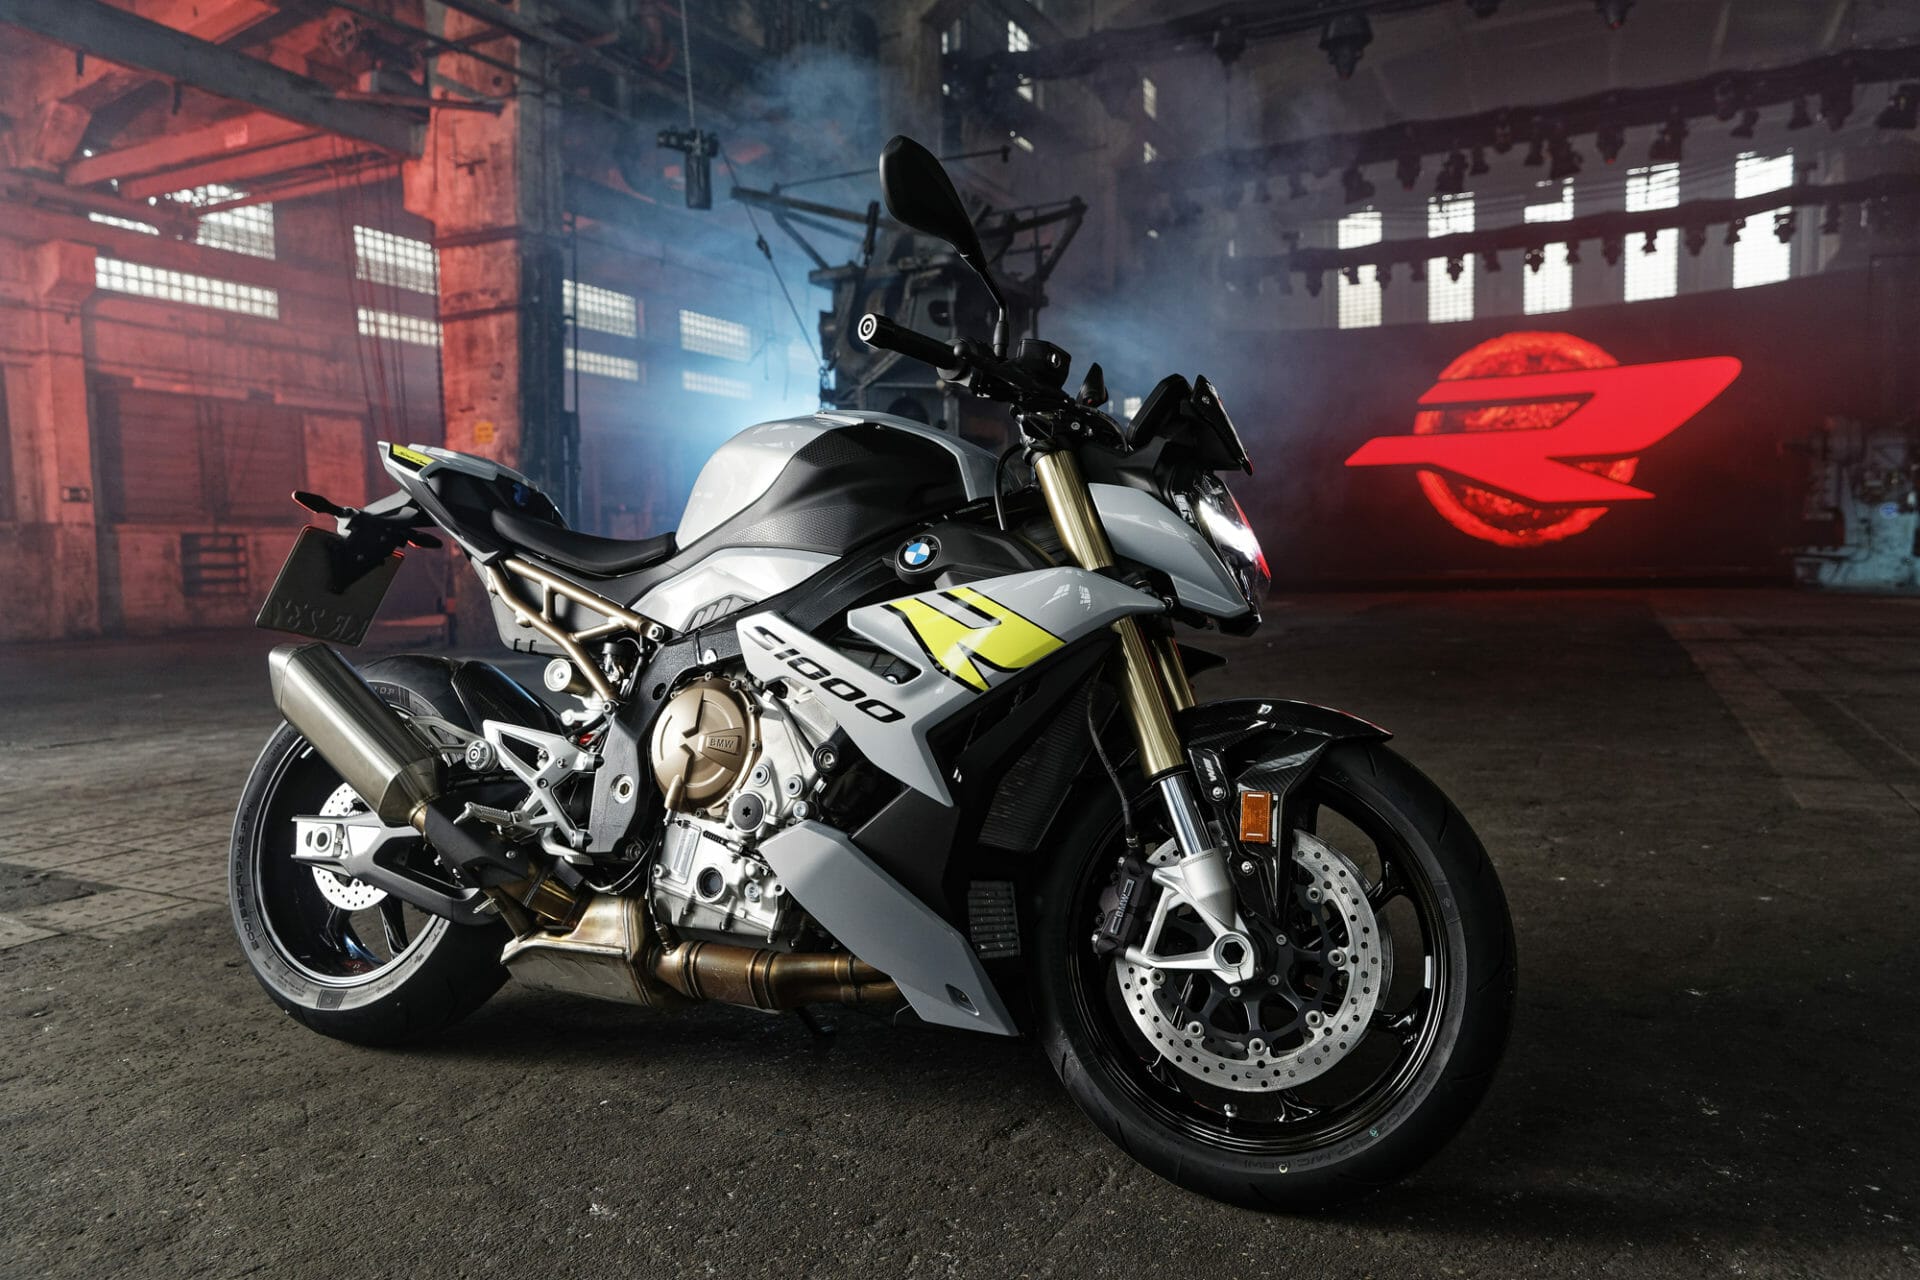 BMW presents new S 1000 R - Awaken the Daredevil
- also in the App MOTORCYCLE NEWS